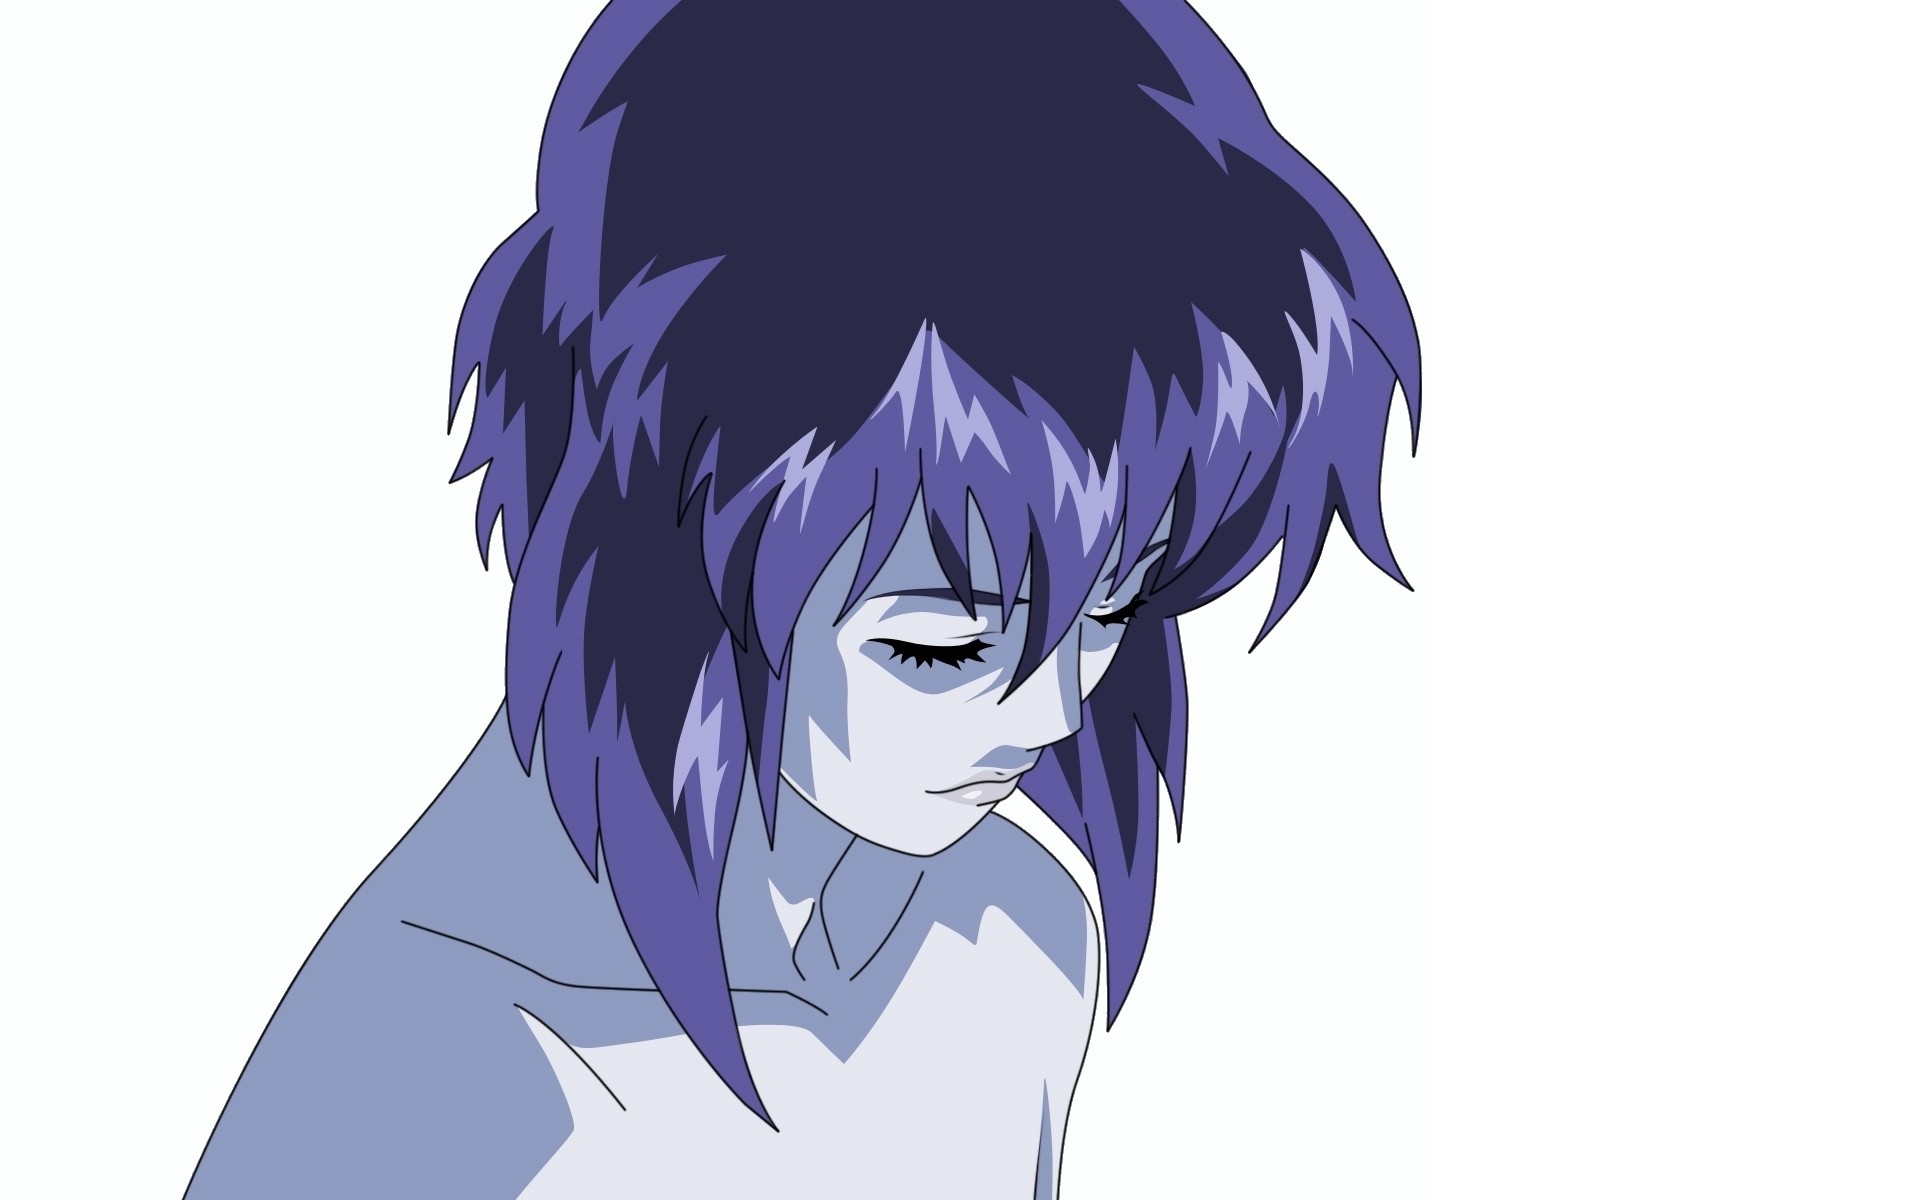 7. "Motoko Kusanagi" from the anime series "Ghost in the Shell" - wide 11